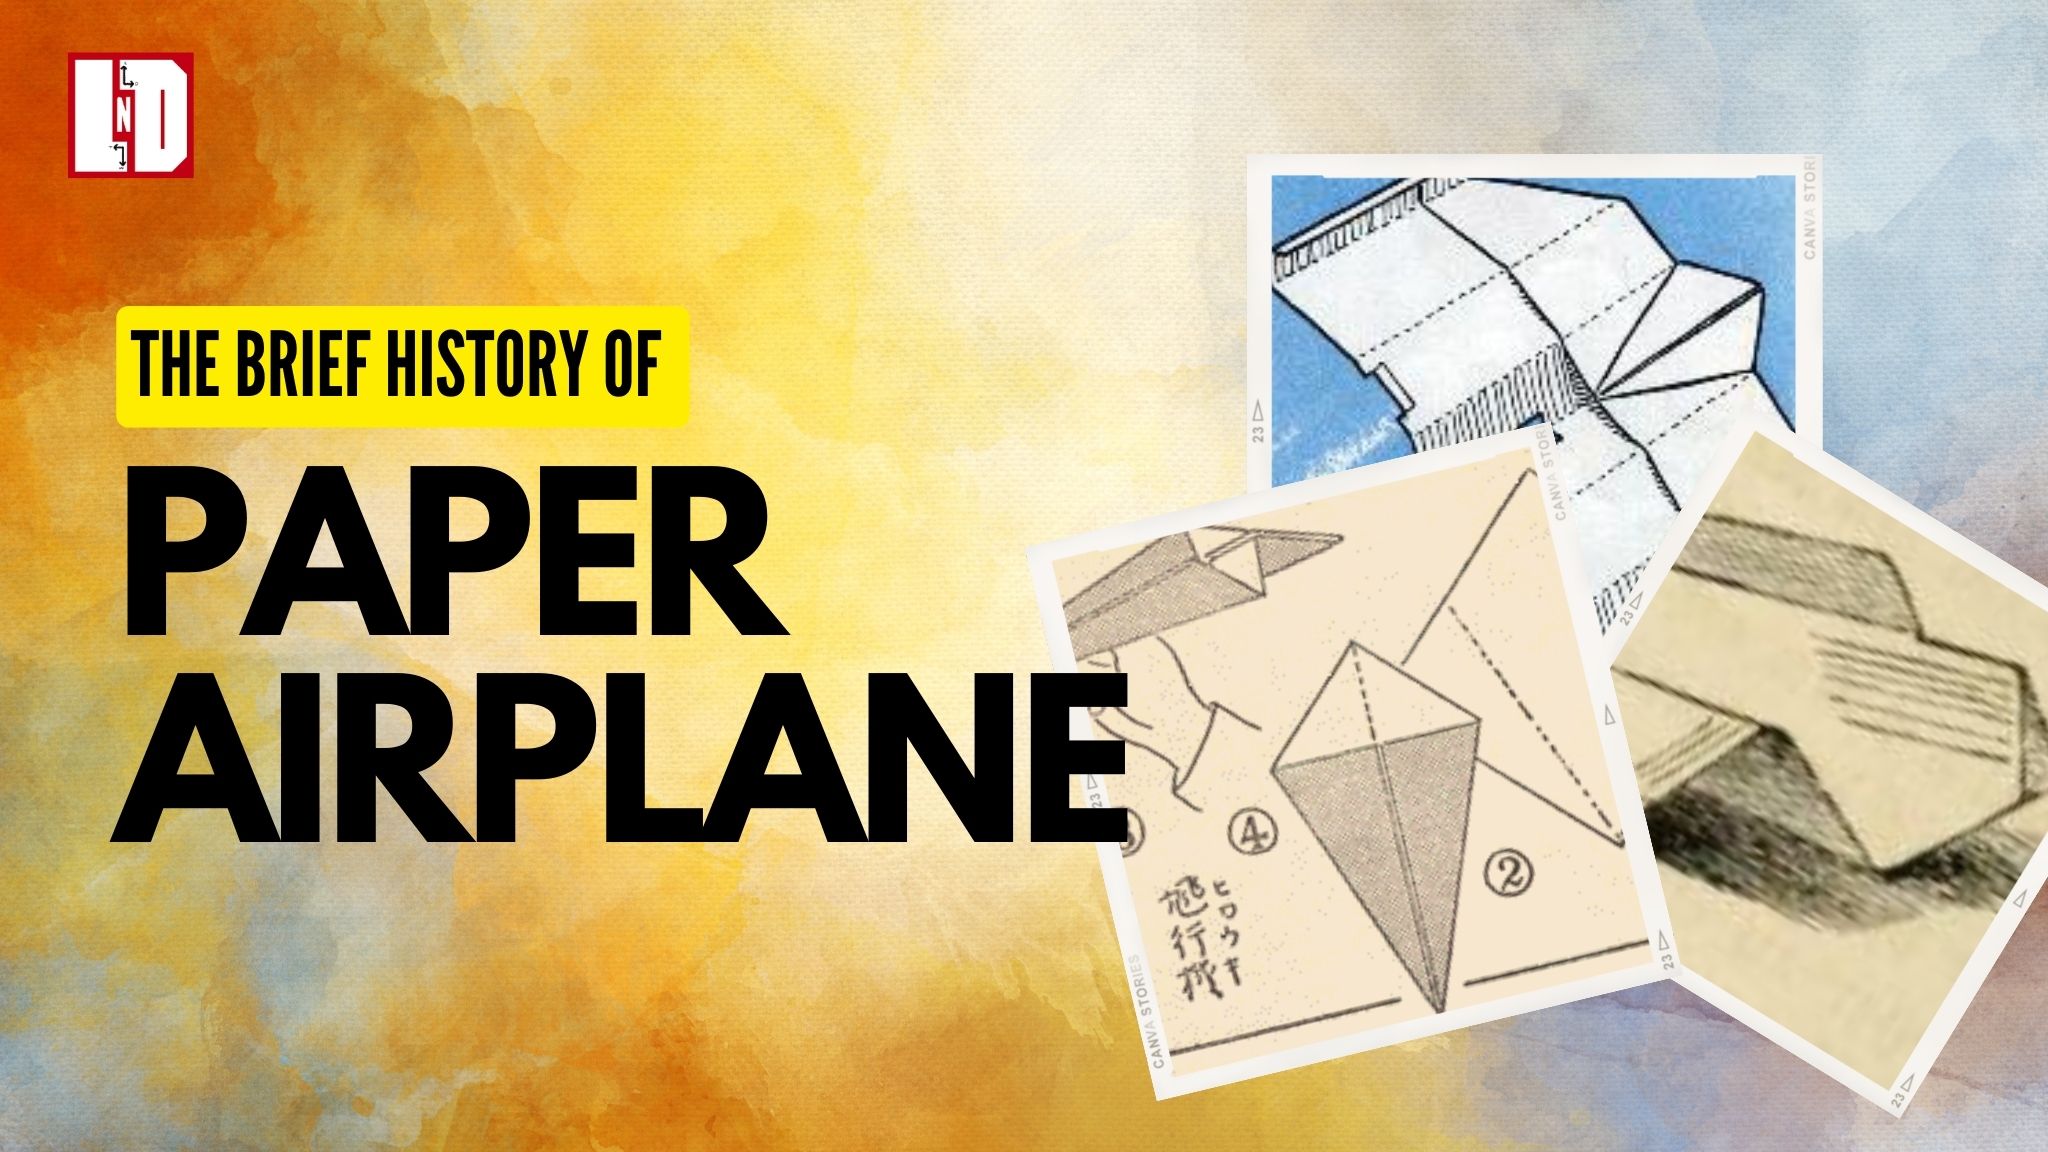 A brief history of paper airplanes - How paper planes come to life?